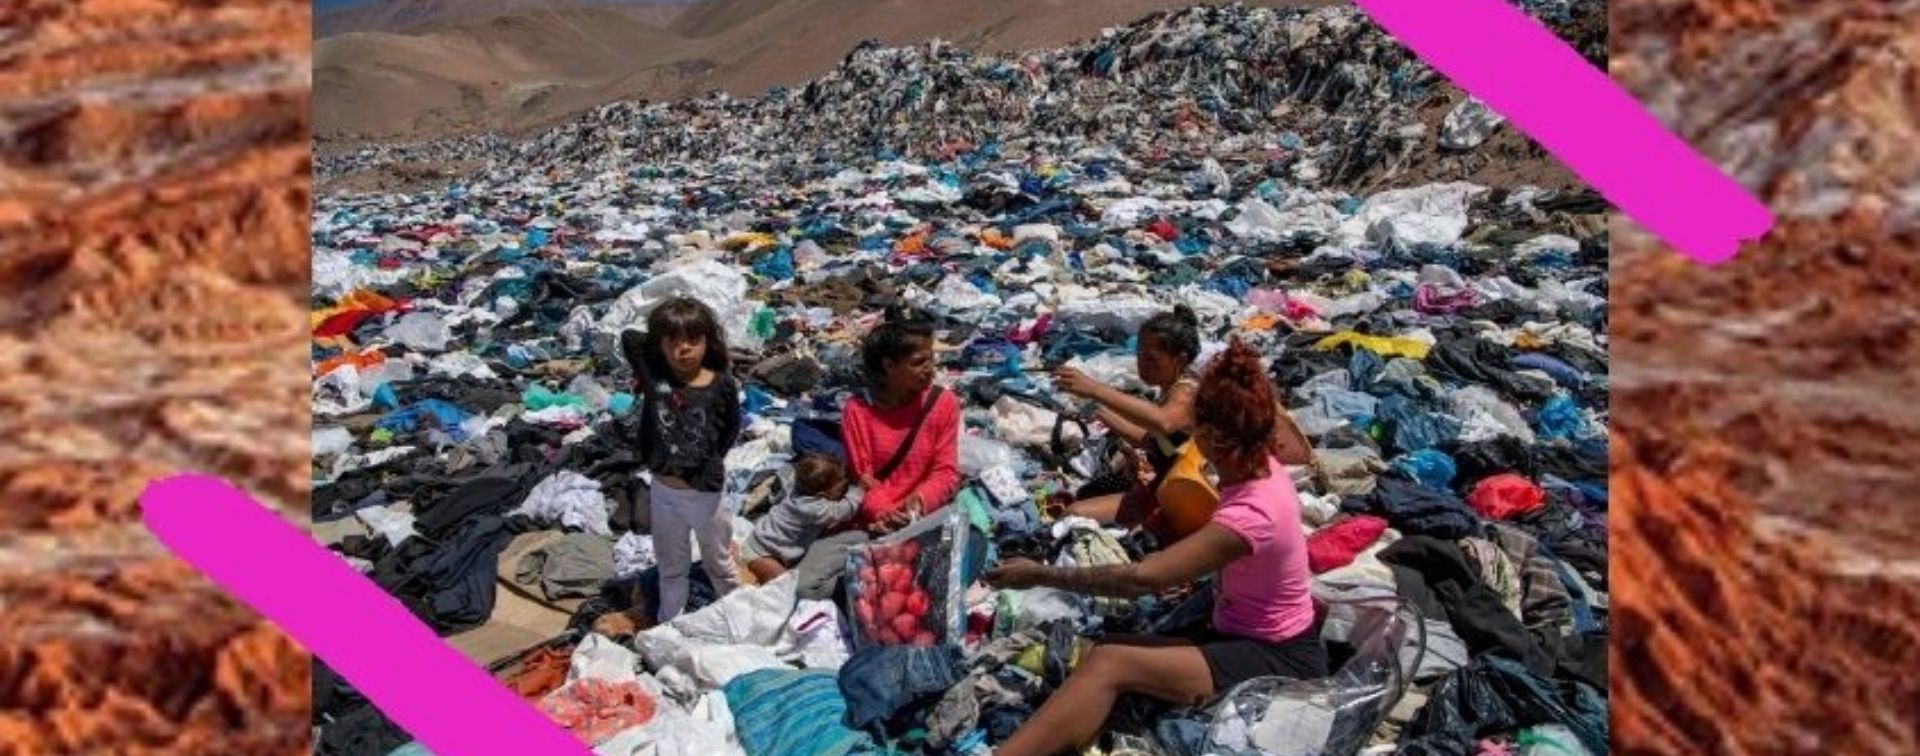 The chilling reality of the fast fashion industry: The Atacama Desert